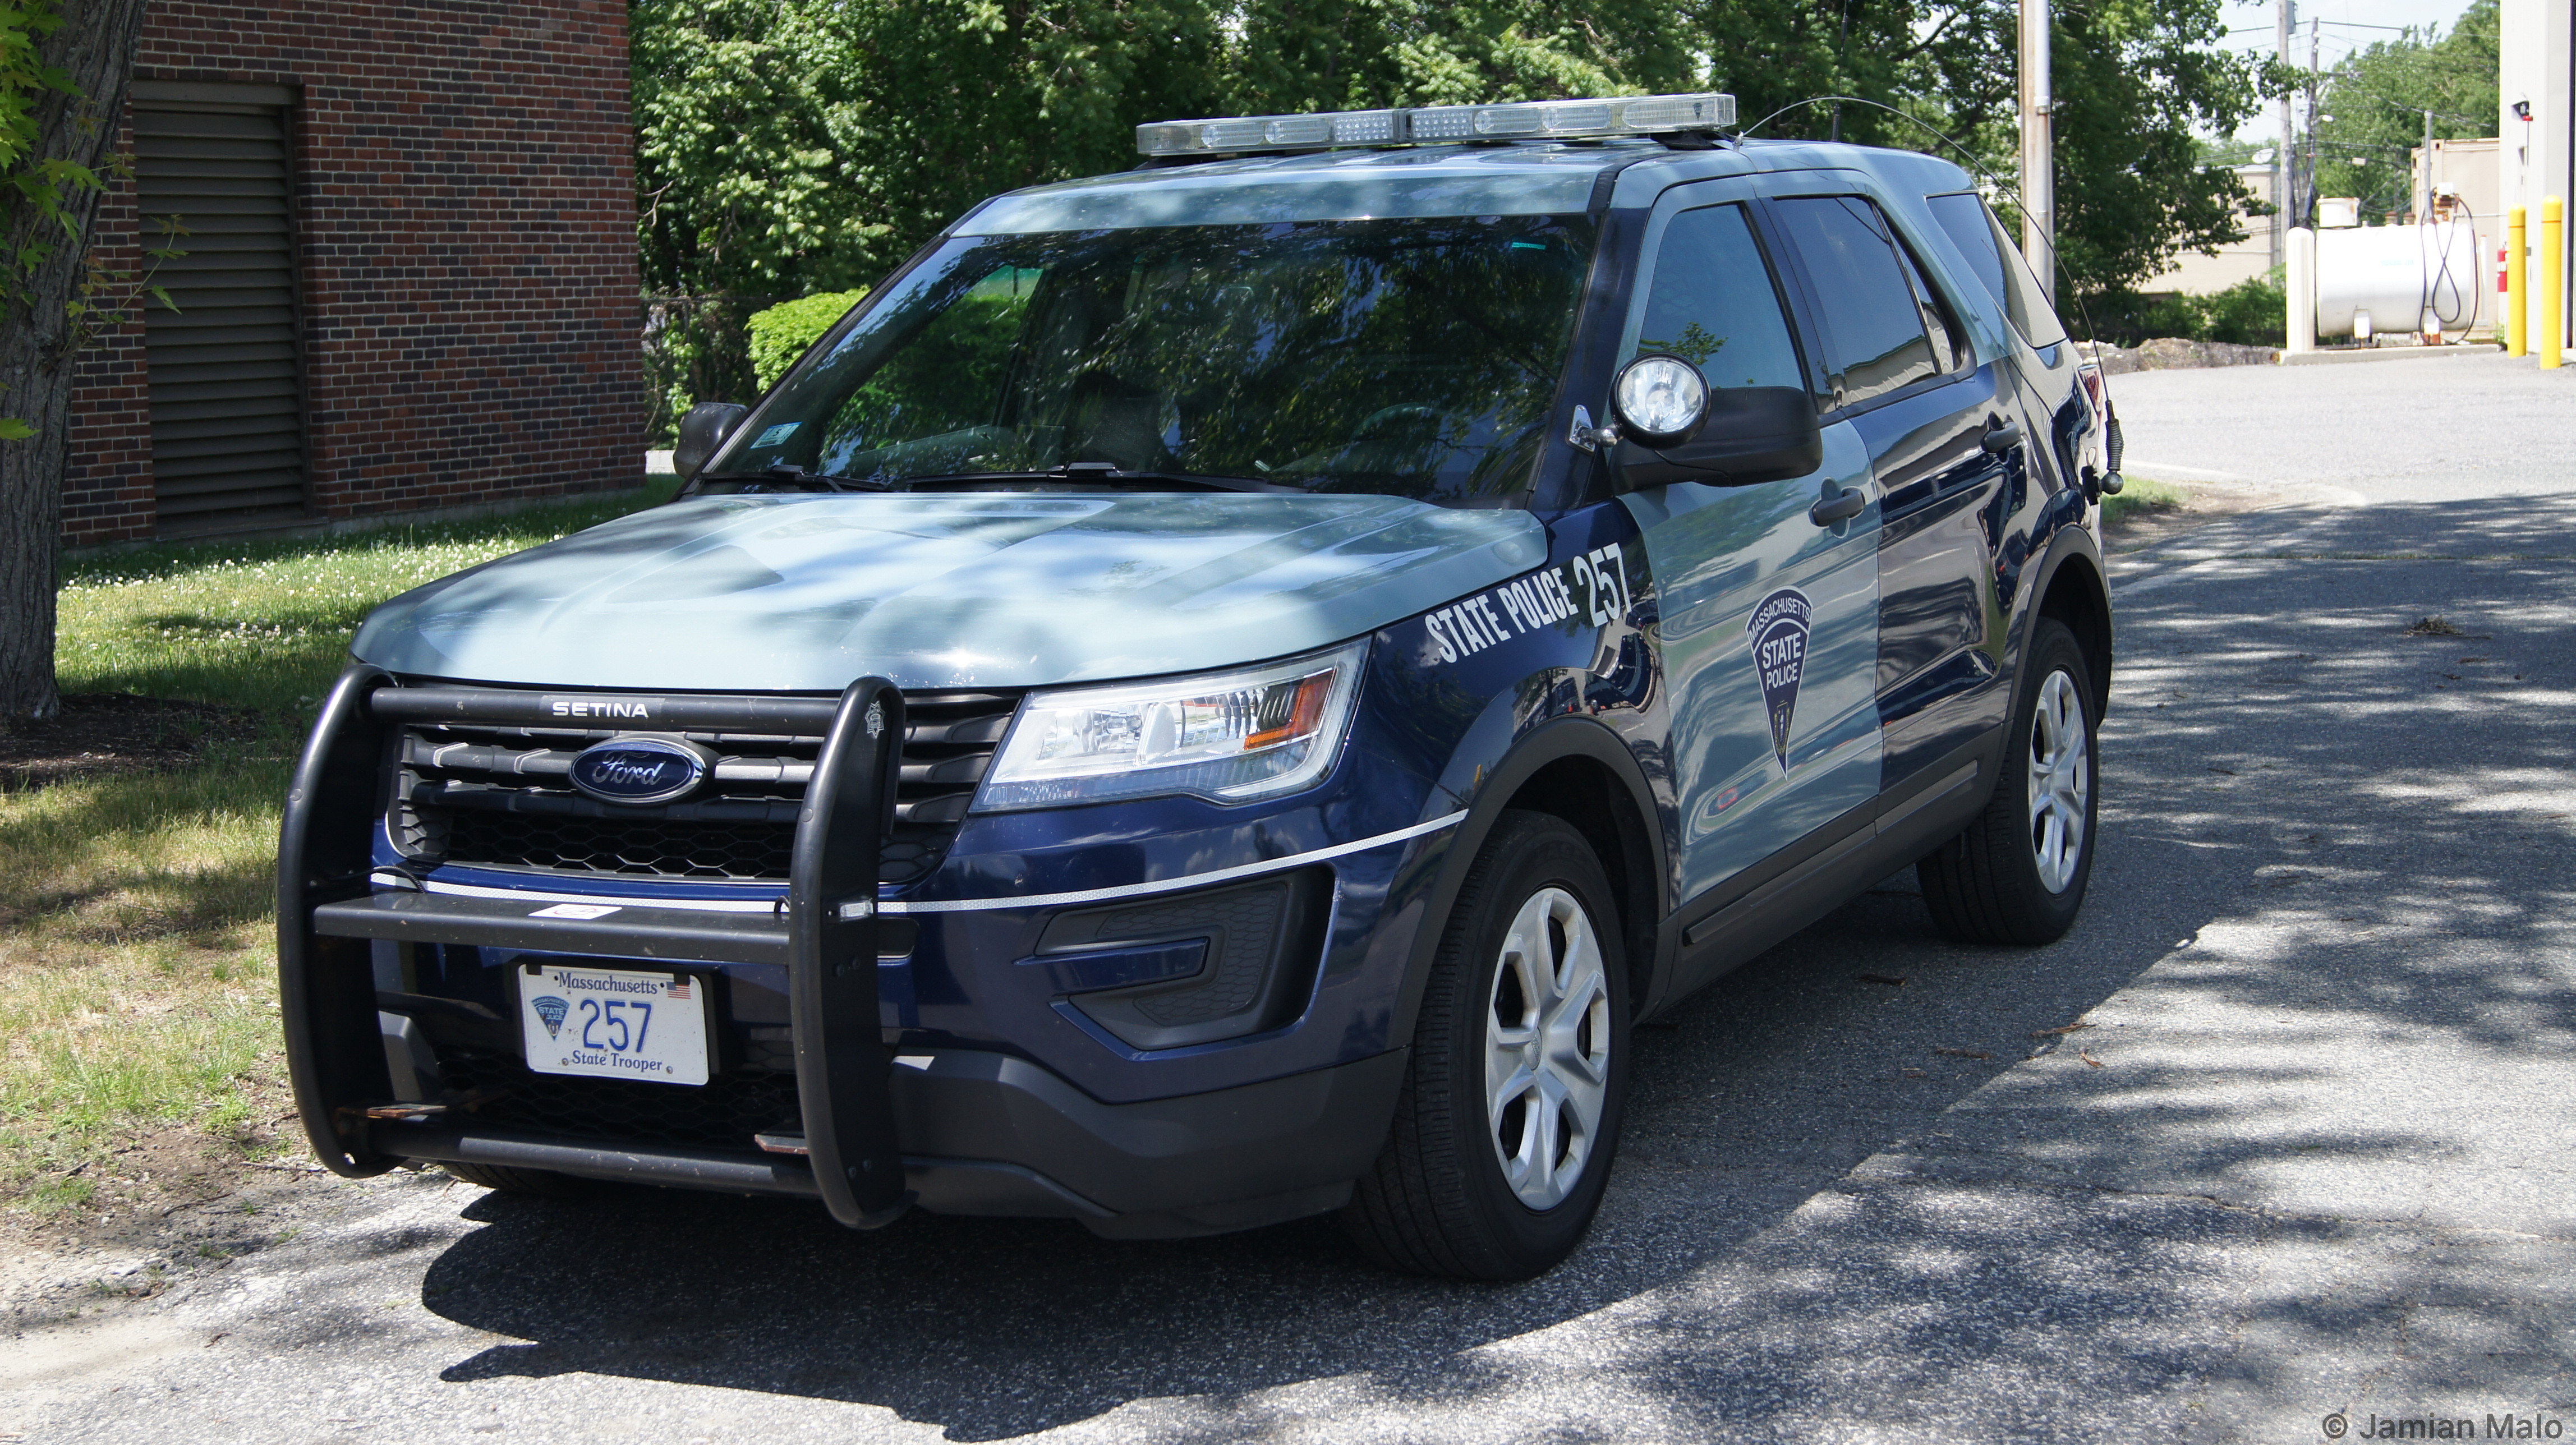 A photo  of Massachusetts State Police
            Cruiser 257, a 2016-2019 Ford Police Interceptor Utility             taken by Jamian Malo